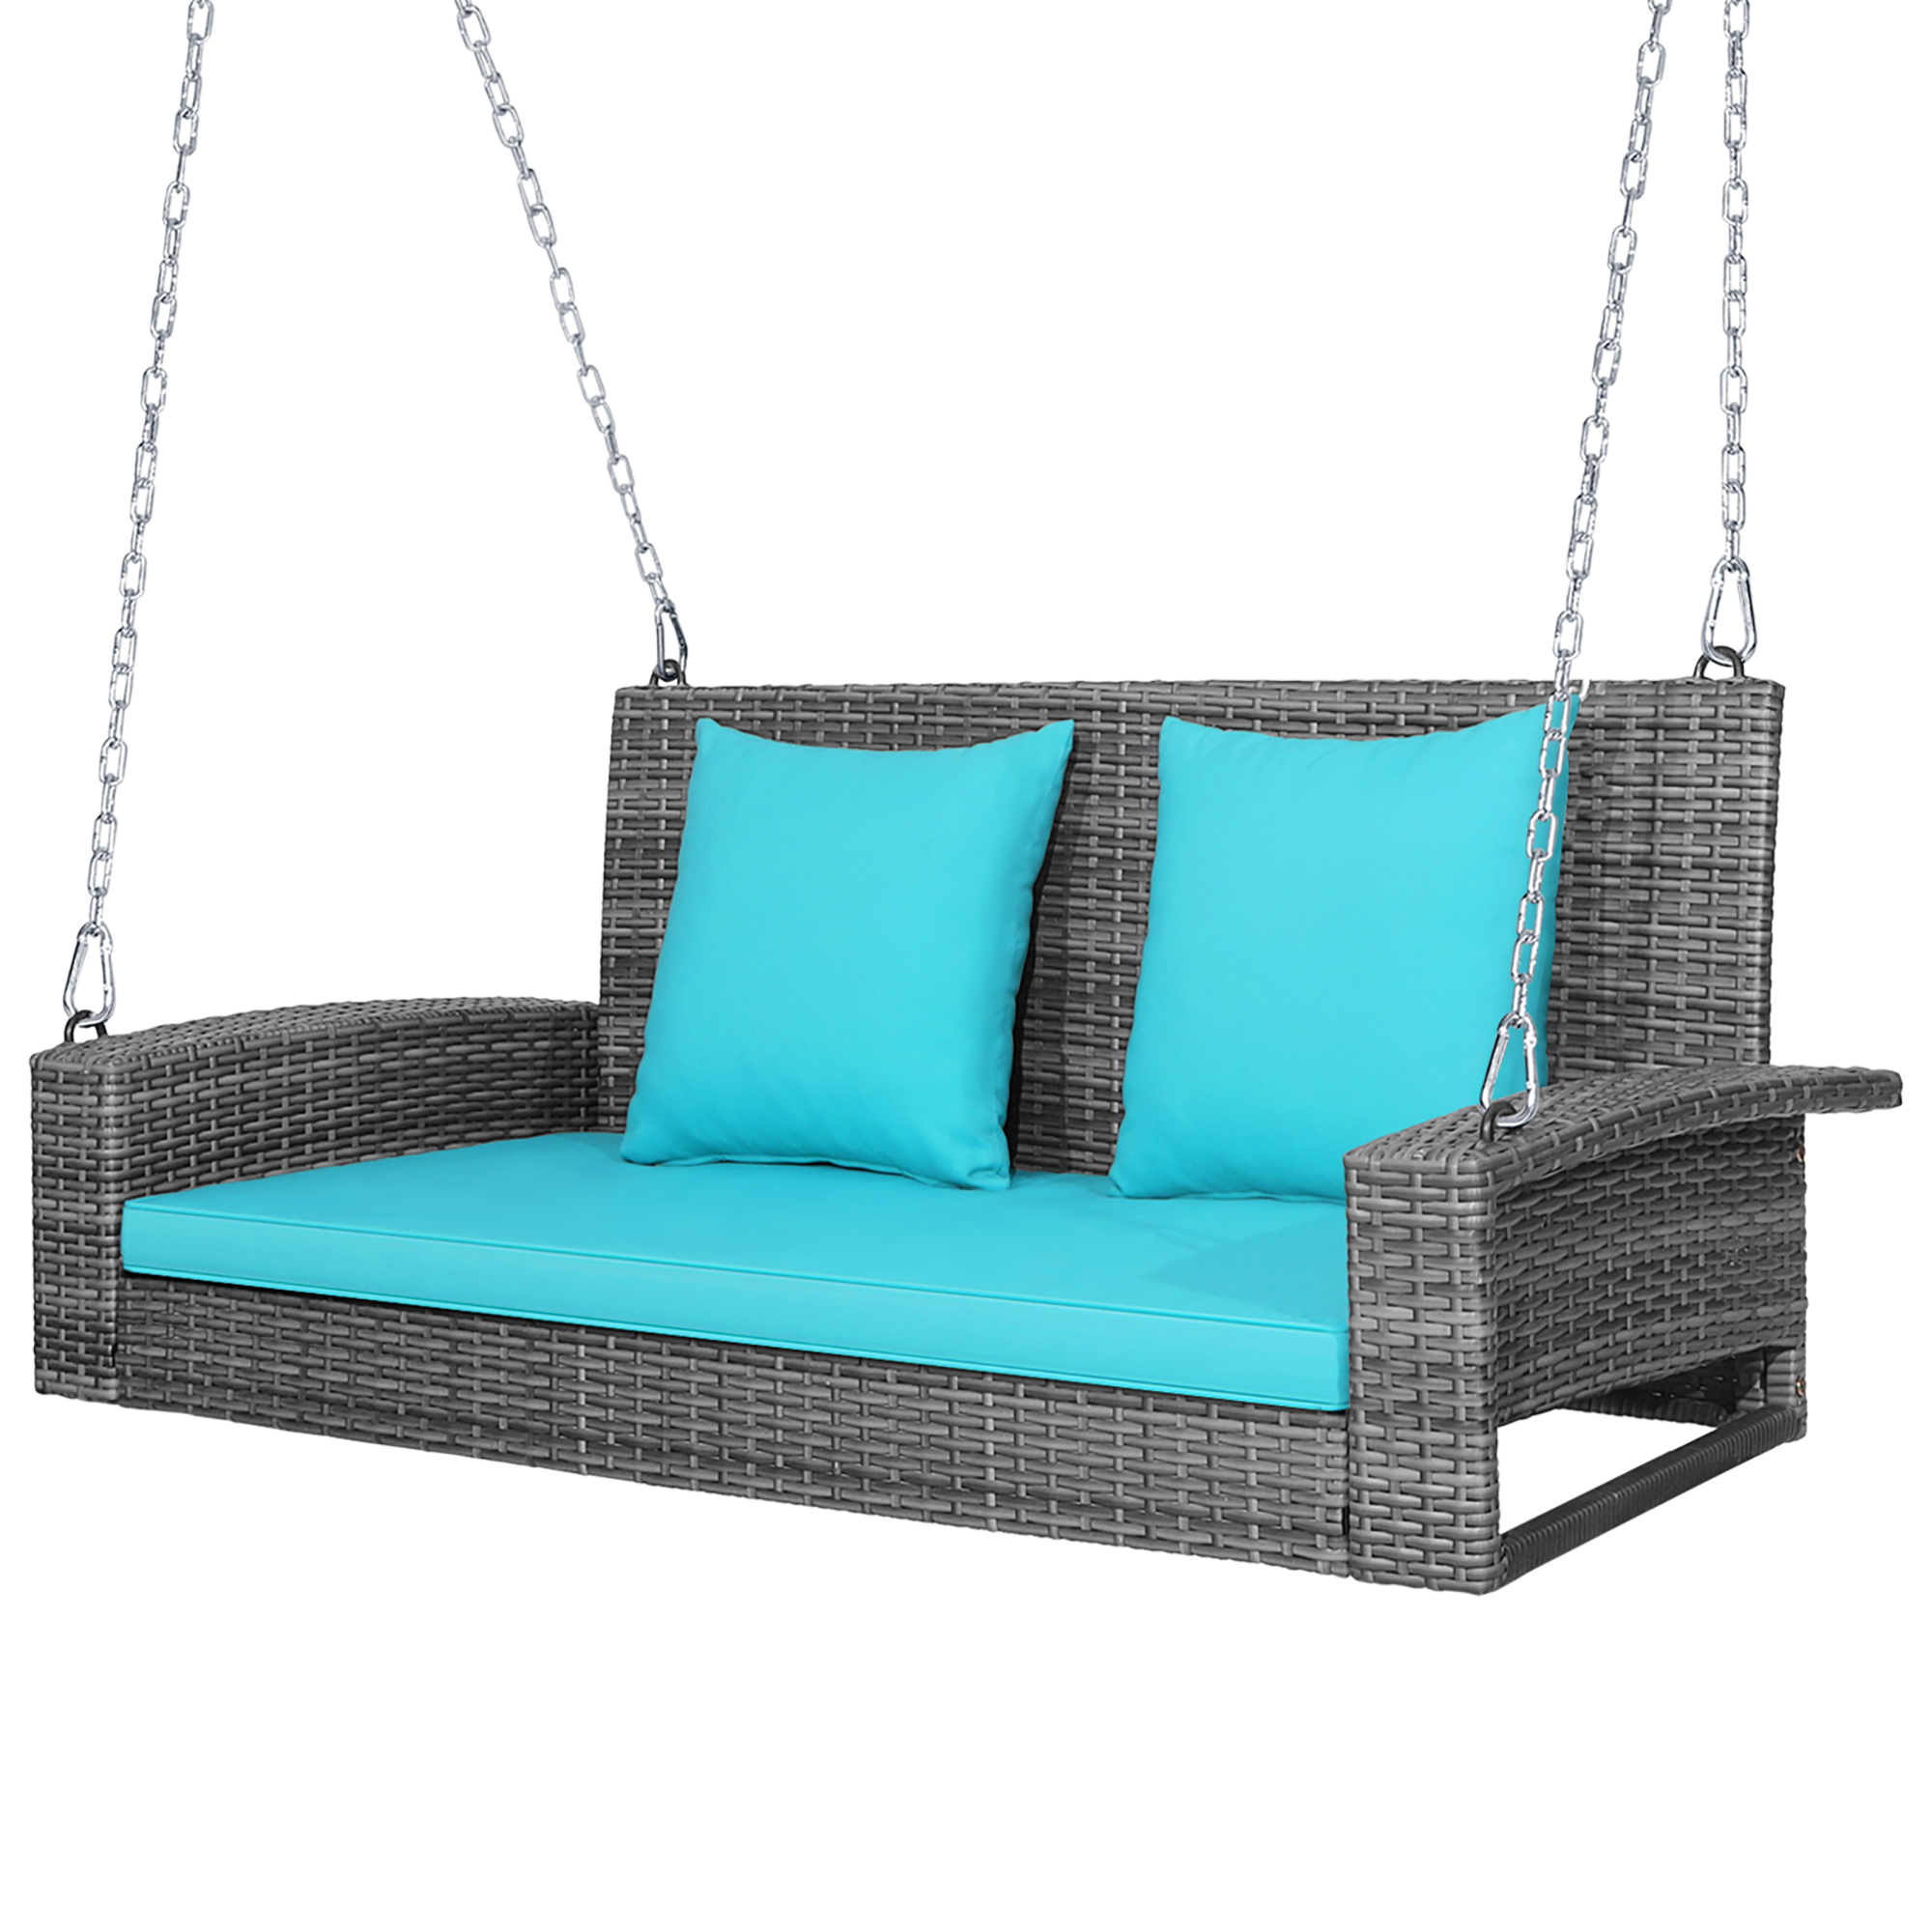 Costway 2-Person Patio PE Wicker Hanging Porch Swing Bench Chair Cushion 800lbs - image 1 of 10